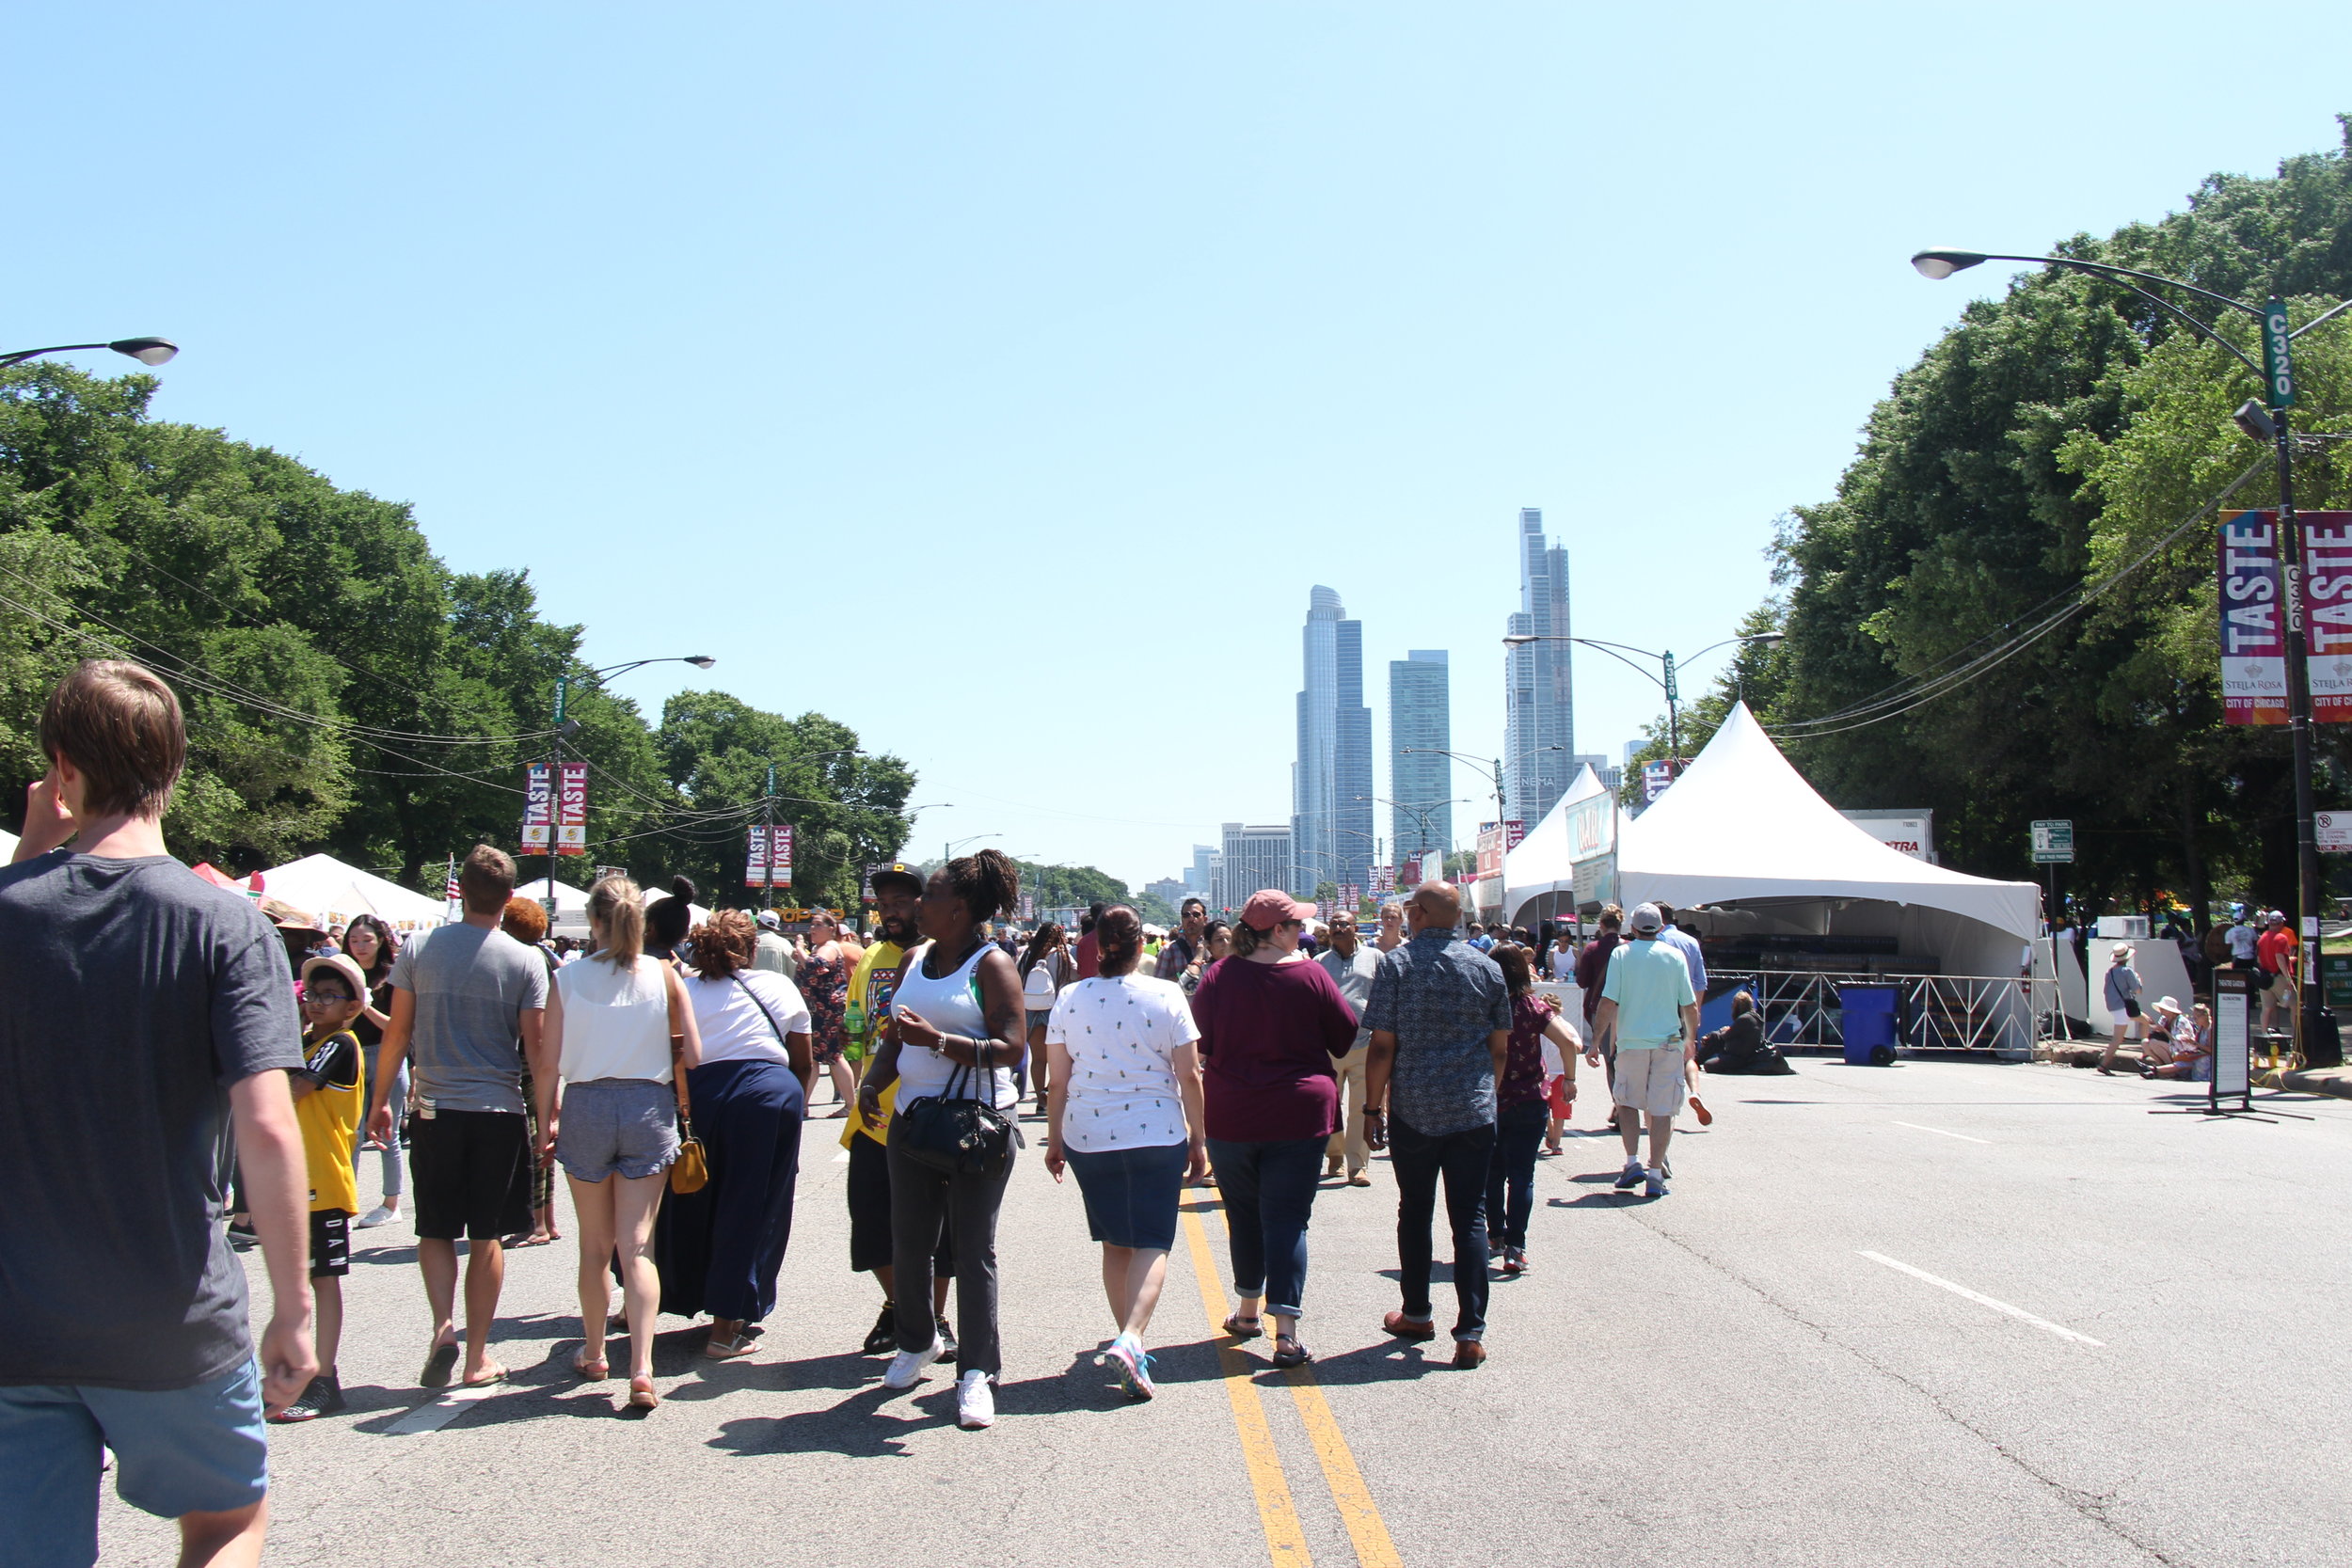  Family and friends walking through one of the largest food festivals in Chicago. Photo by Millie Johnson 